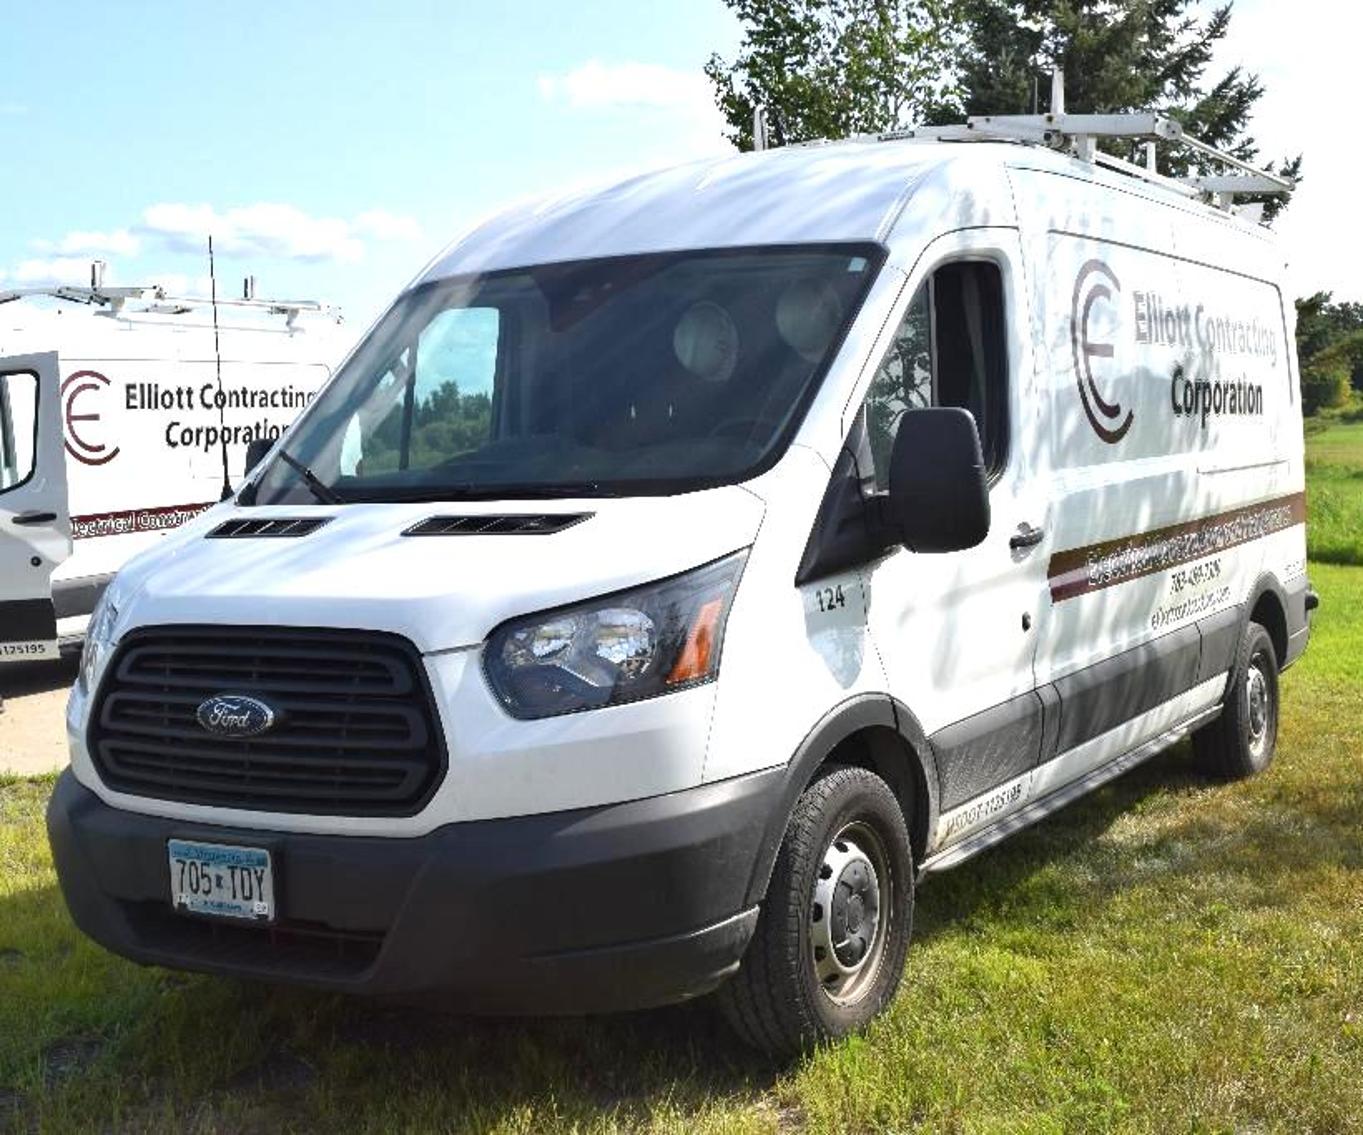 Late Model Electrical Contractor Vehicles